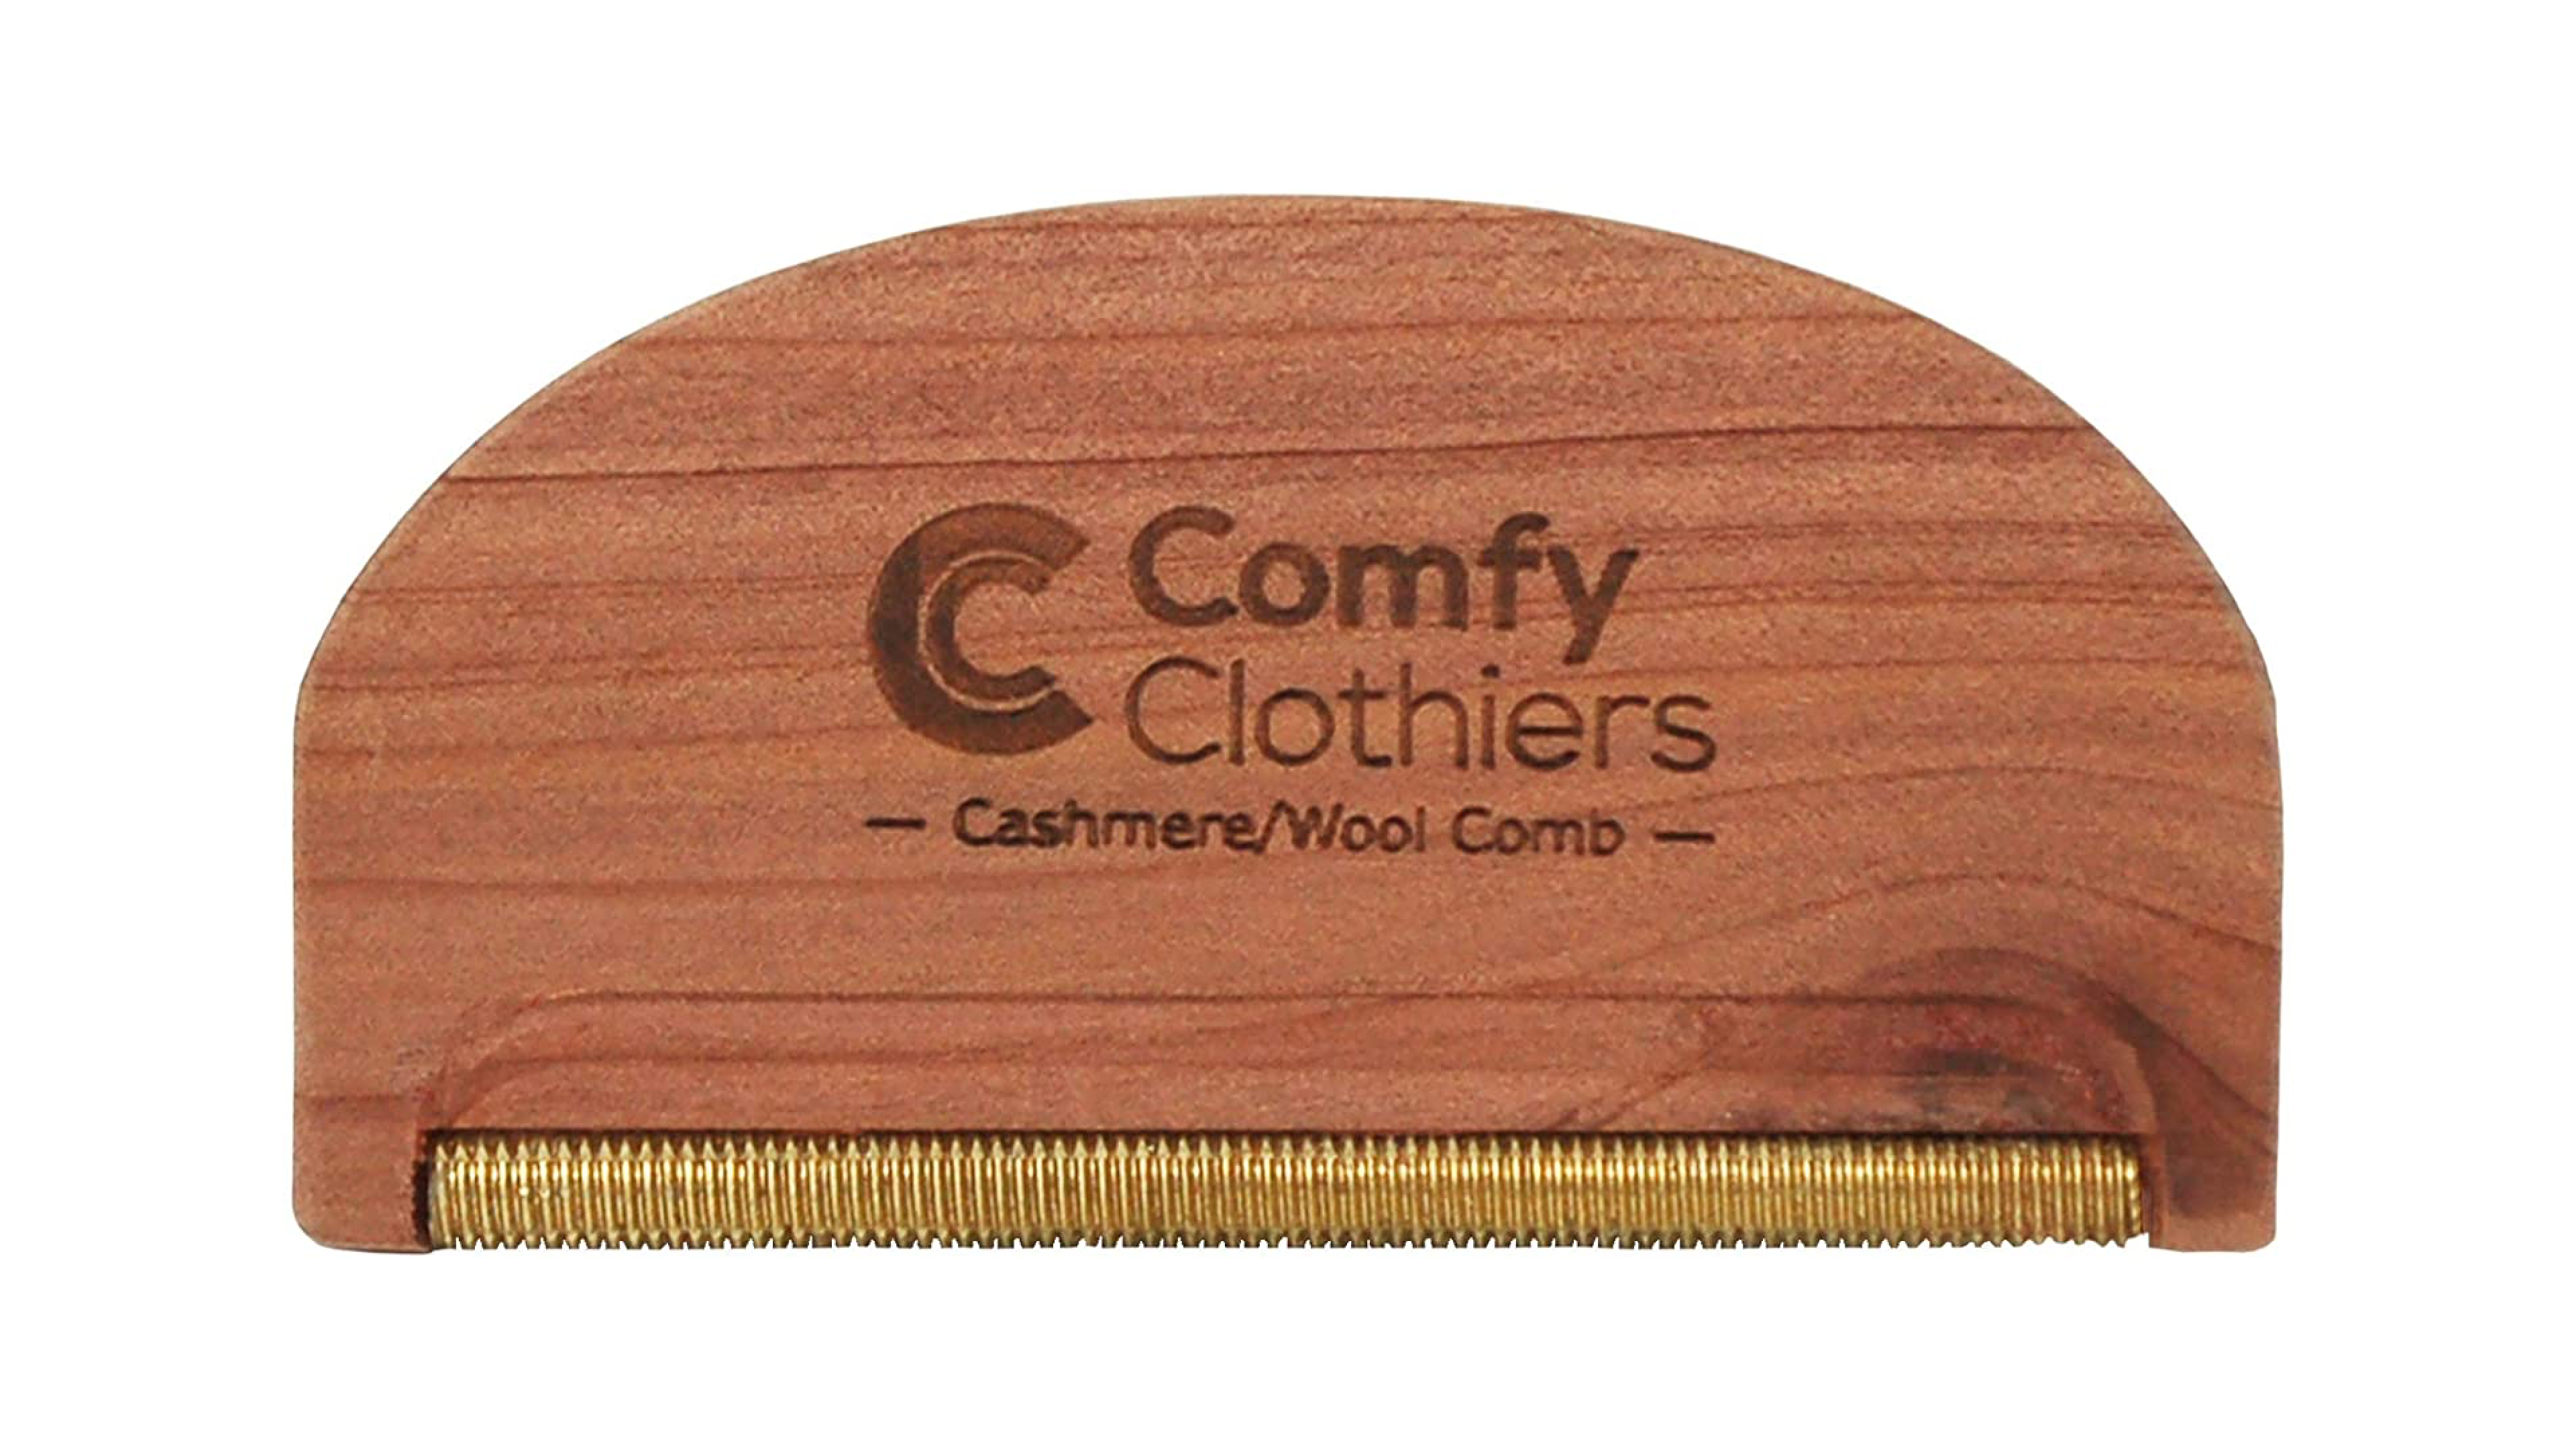 cashmere and wool comb for pills and lint